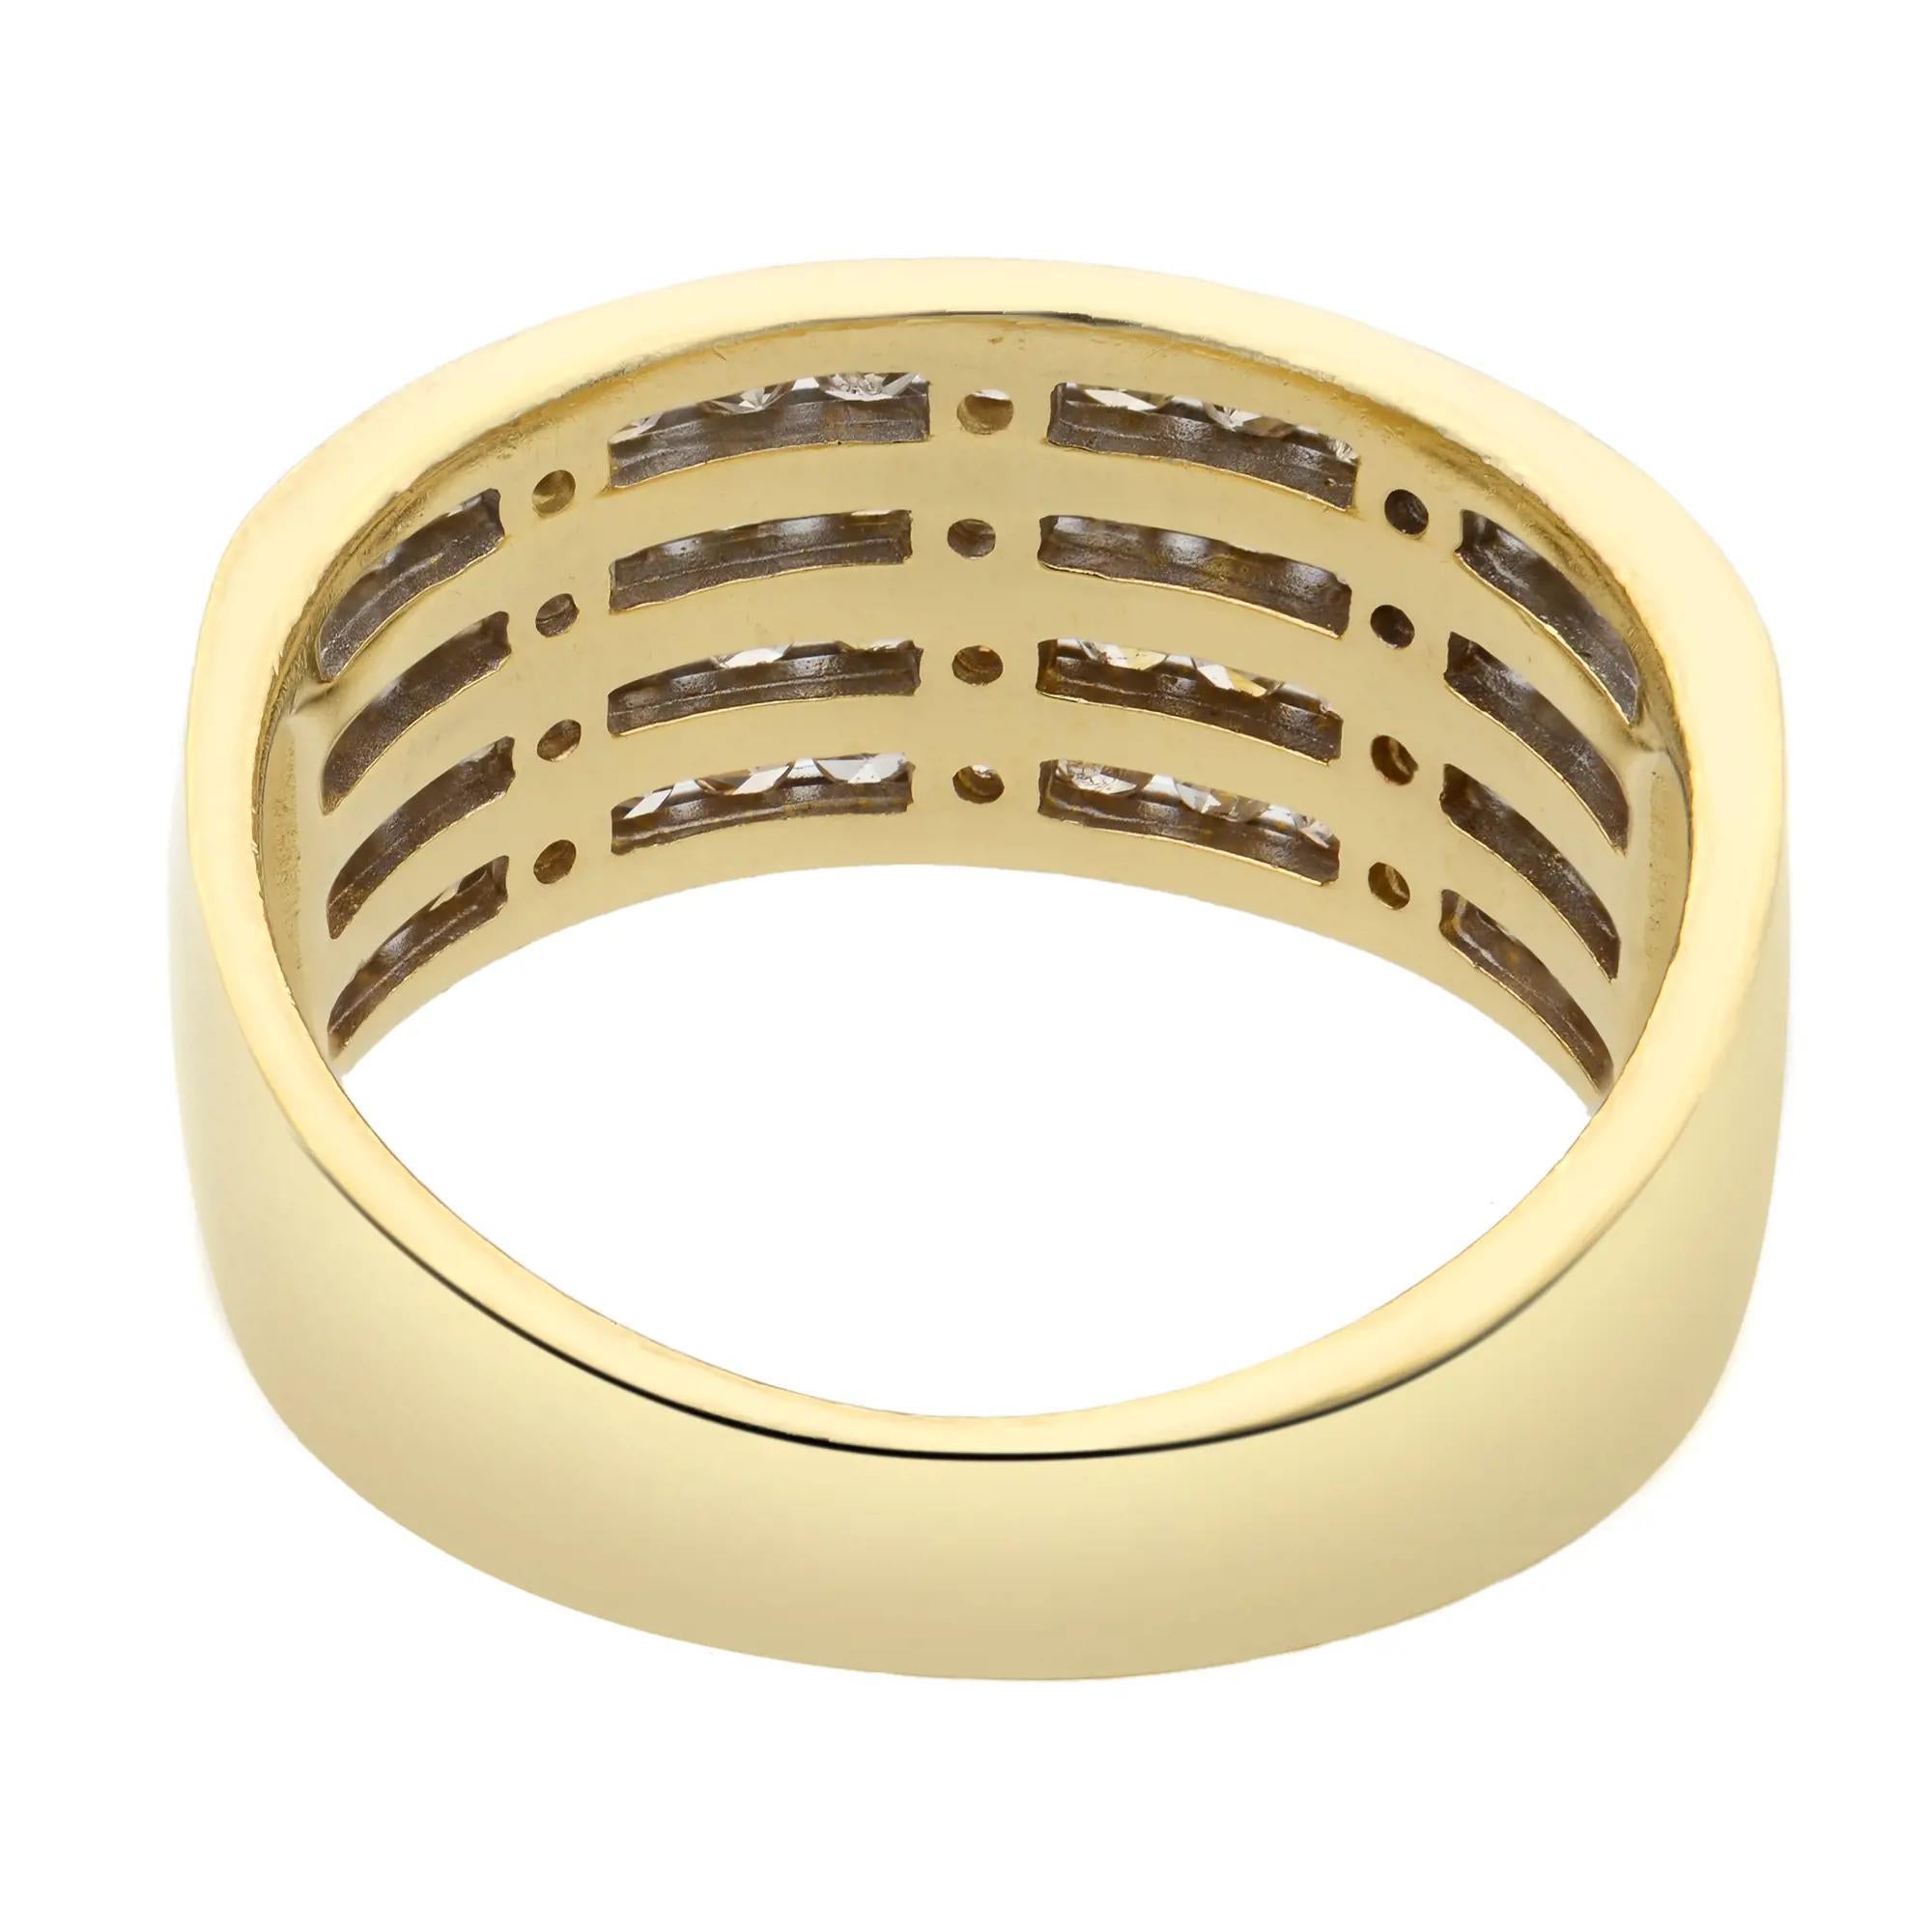 Women's 1.00Cttw Round Cut Diamond Ladies Band Ring 10K Yellow Gold Size 7.25 For Sale